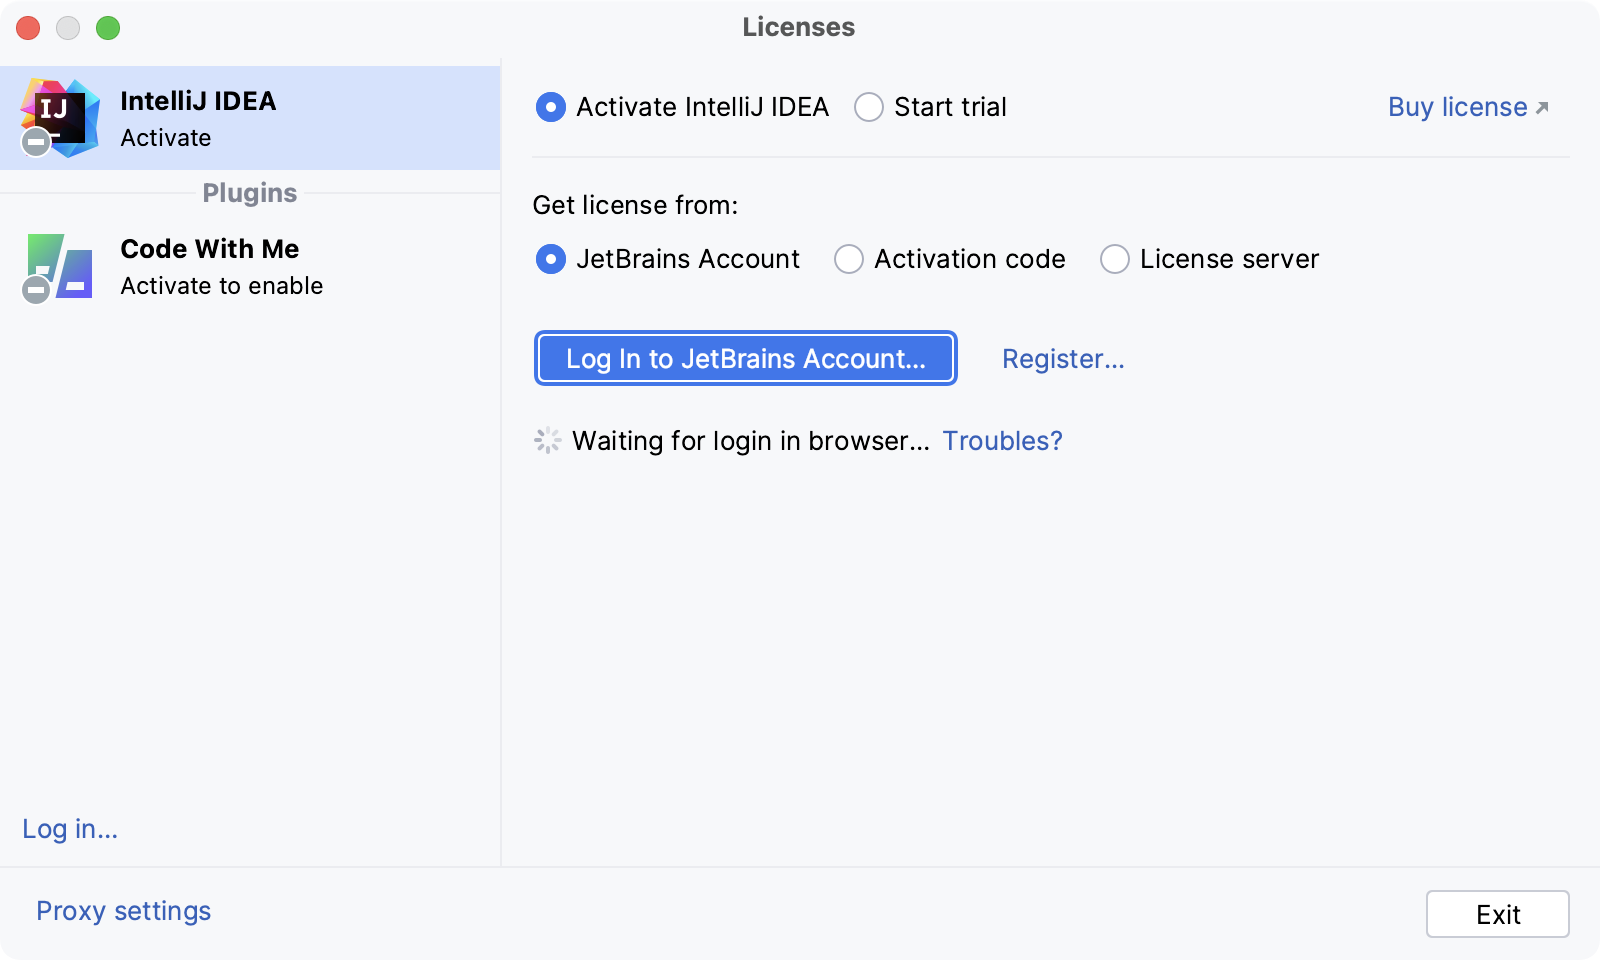 Activate IntelliJ IDEA license with a JB Account